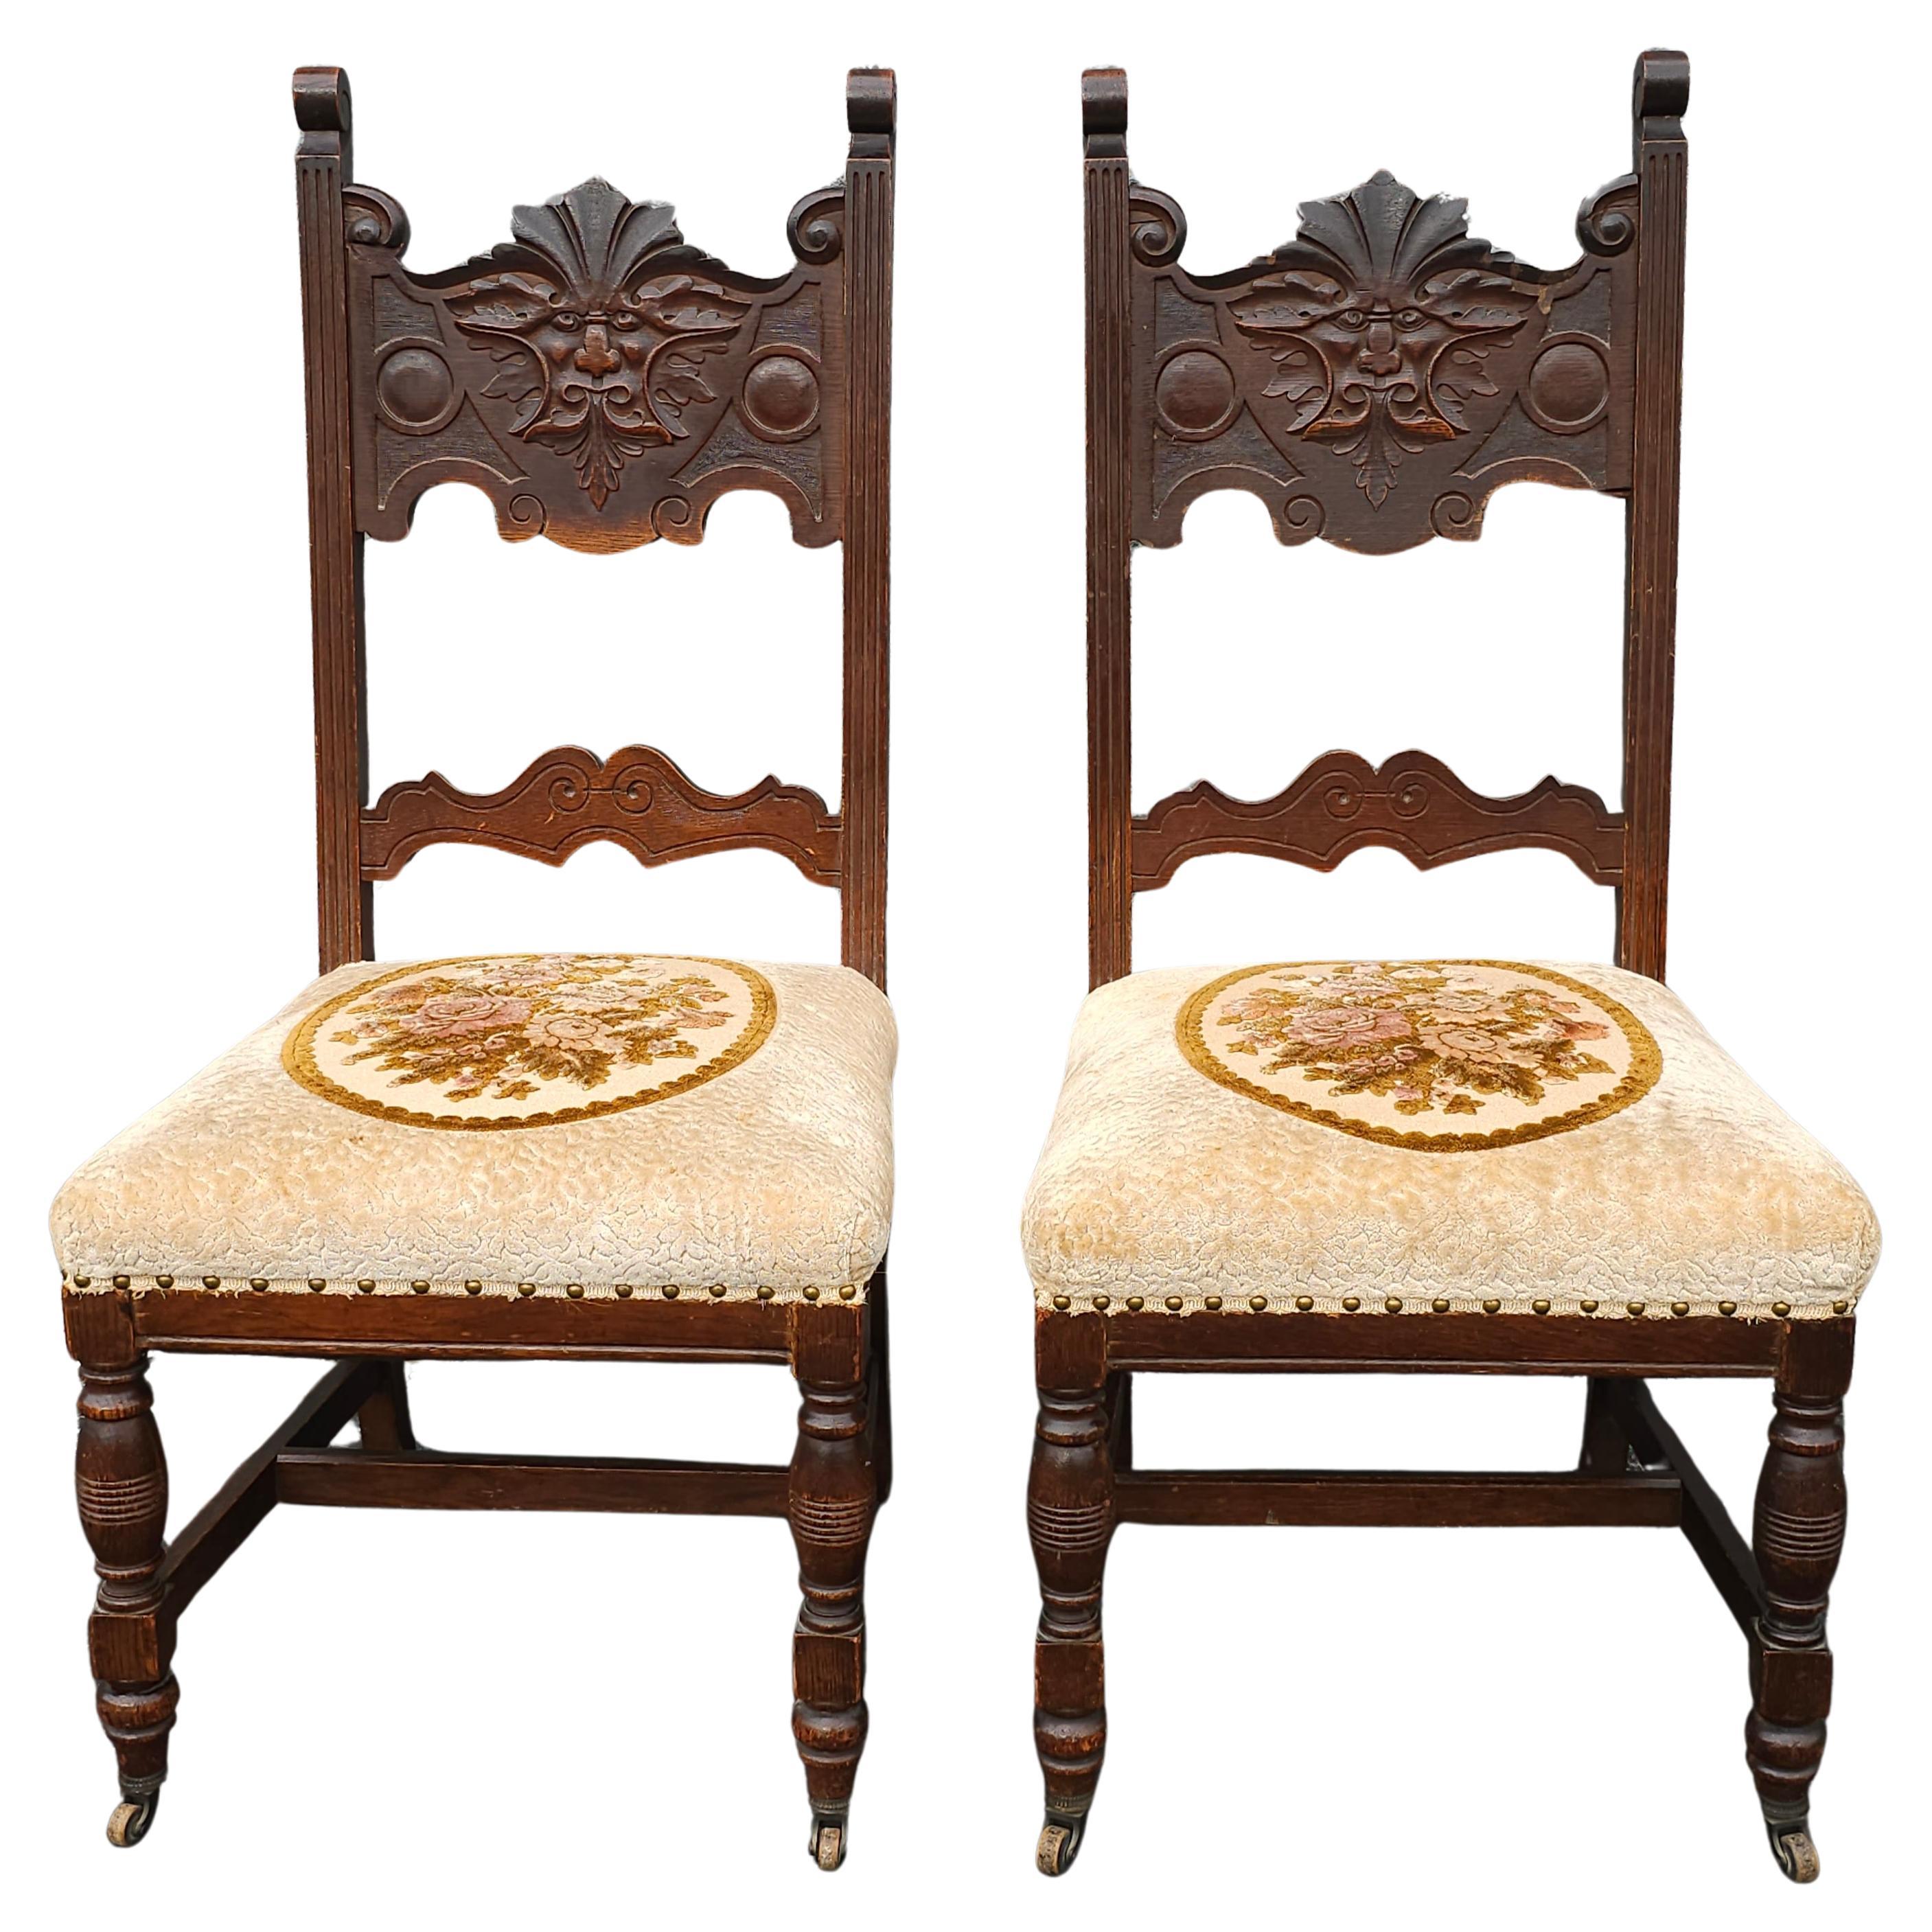 Pair Of Gothic Revival Style Stained Oak Wood And Upholstered Seat Side Chairs For Sale